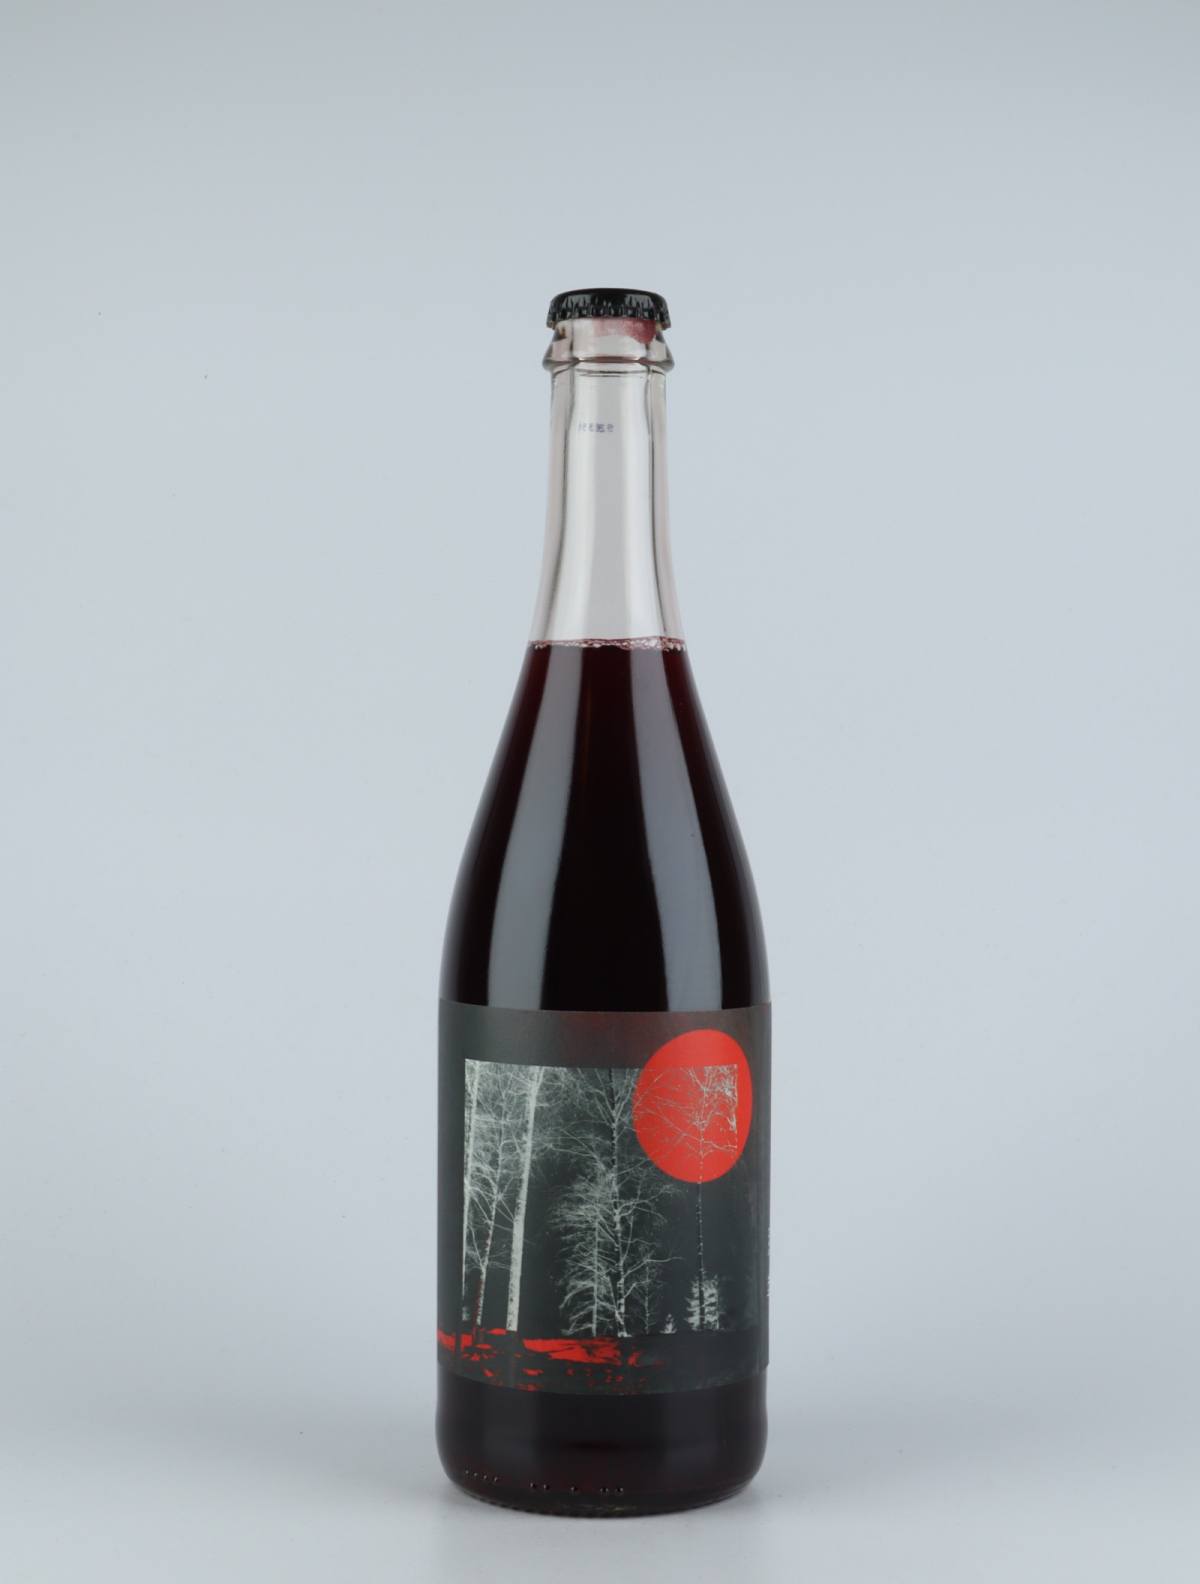 A bottle 2019 Joe-San Red wine from do.t.e Vini, Tuscany in Italy